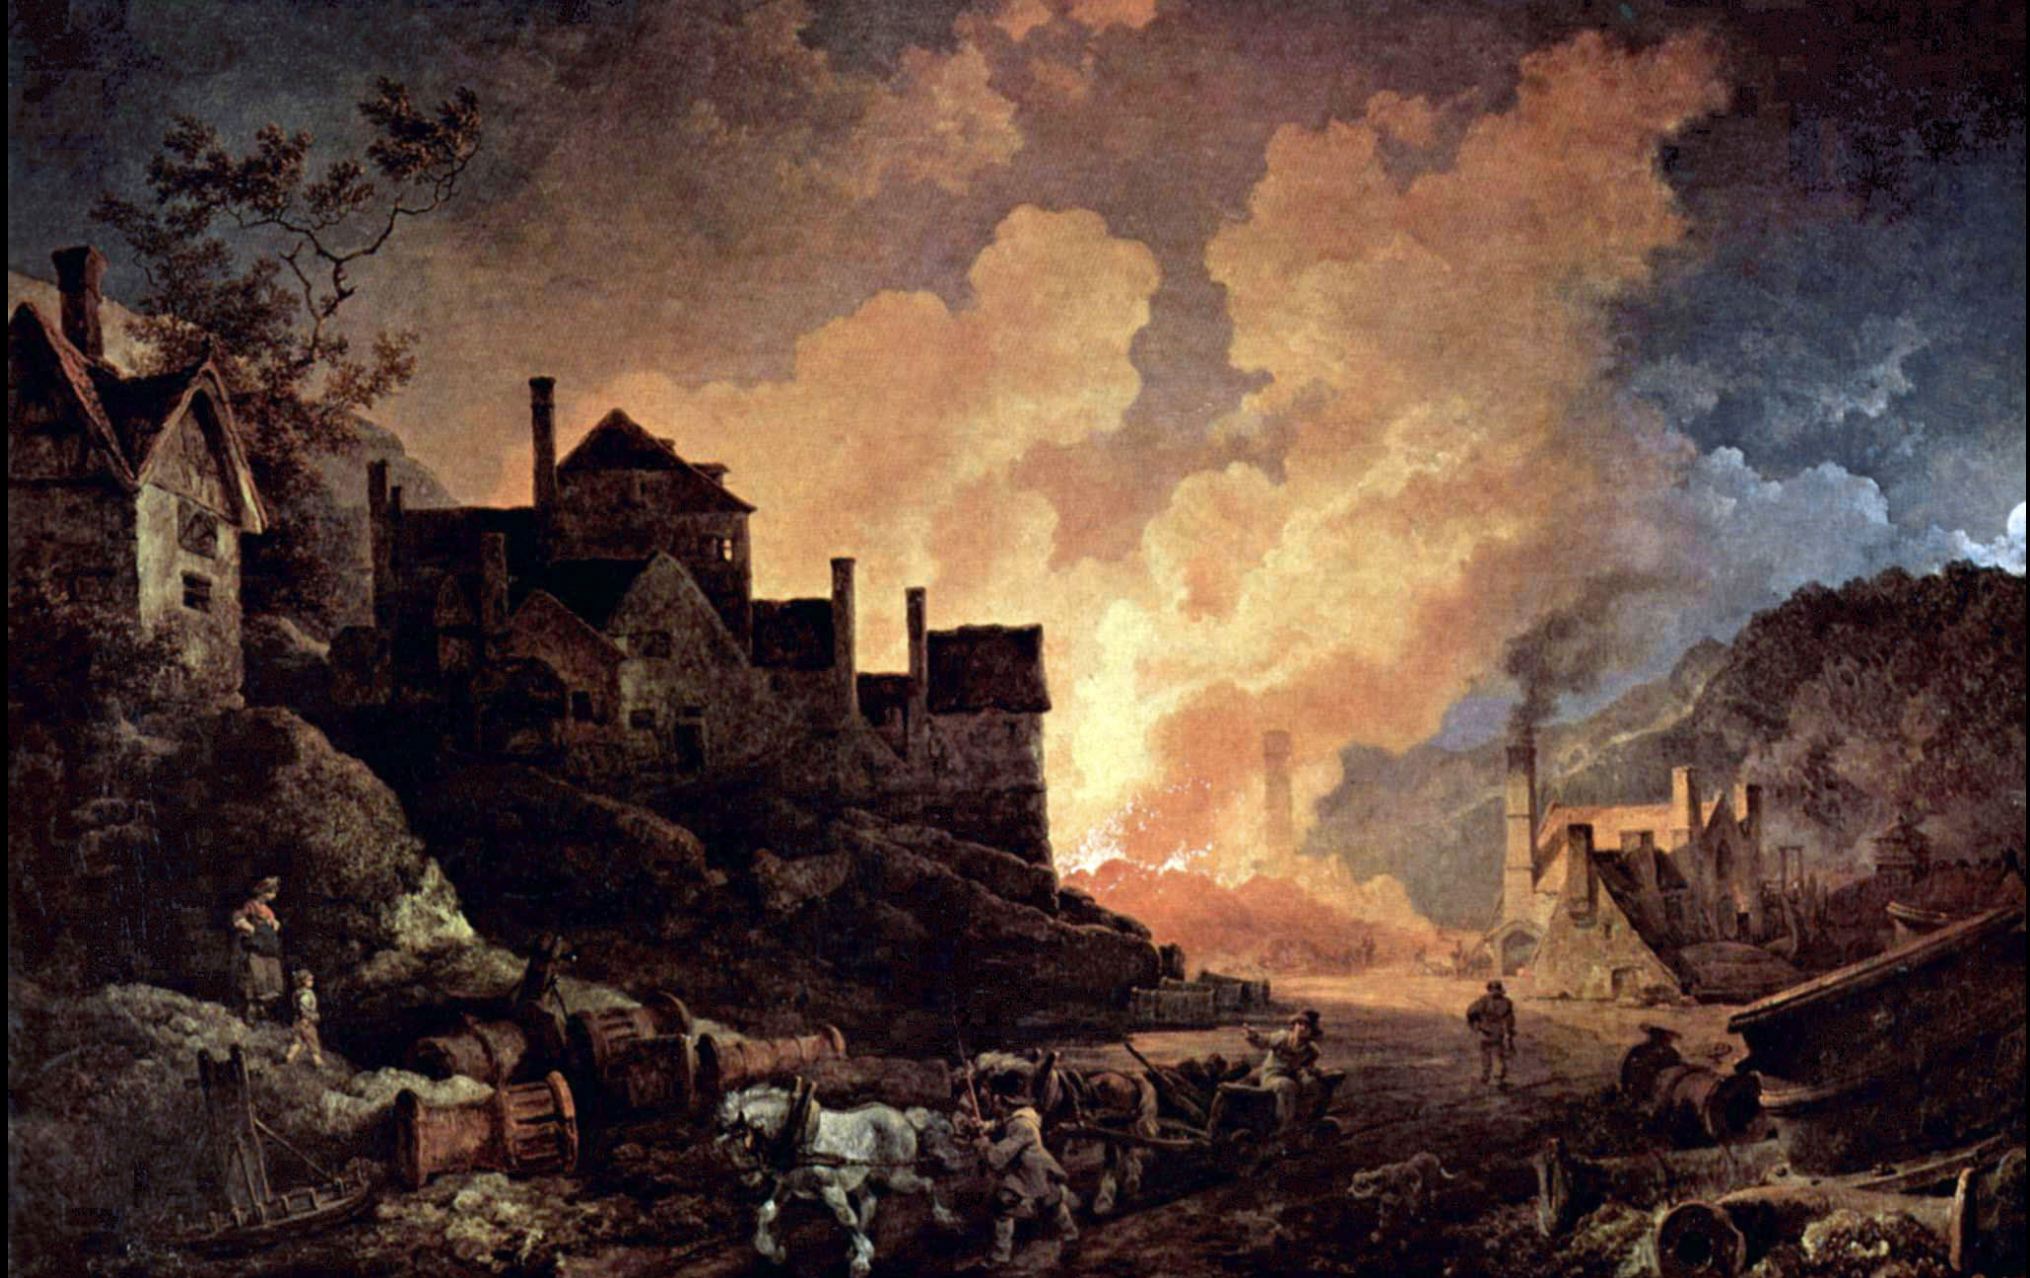 Coalbrookdale by Night is an 1801 oil painting by Philip James de Loutherbourg. The painting depicts the Madeley Wood Furnaces. 